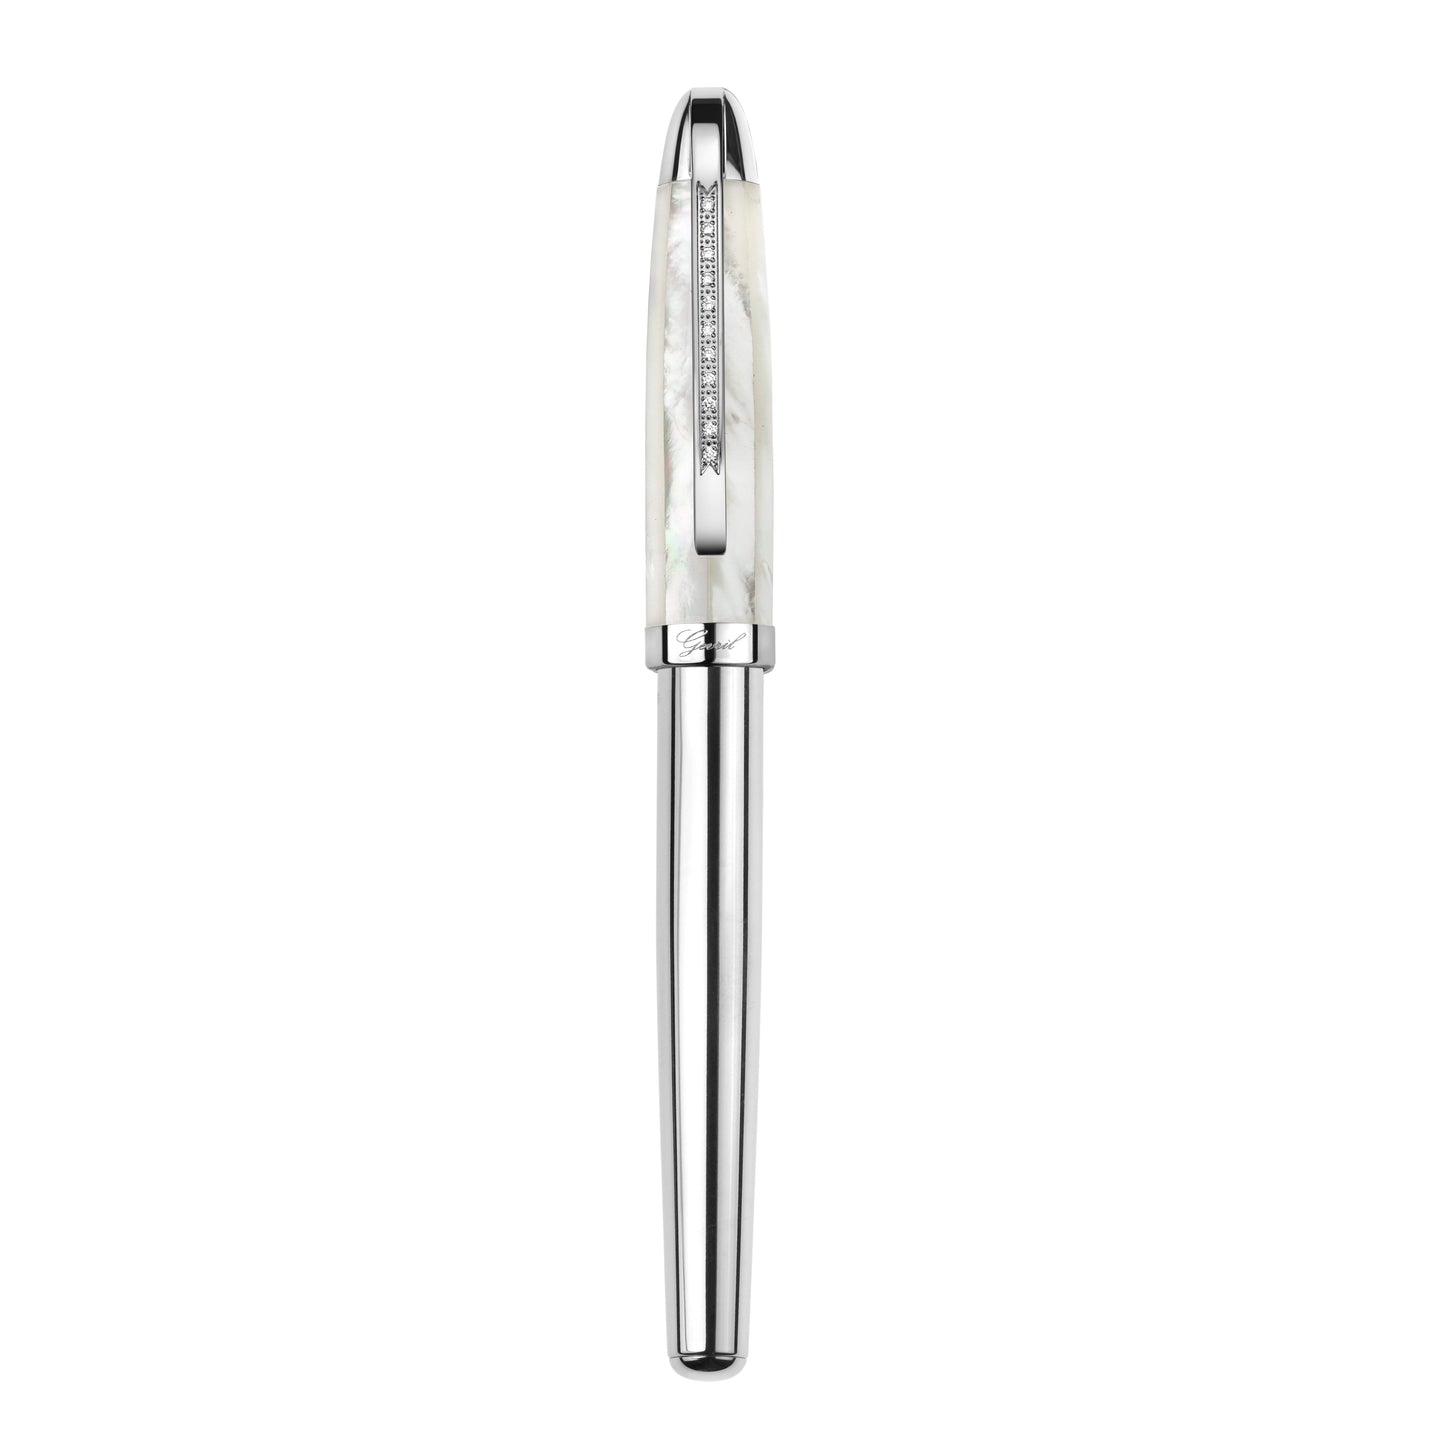 Gevril-Luxury-Swiss-Watches-Gevril Morcote Roller Ball Pen-GEV-R9262-0